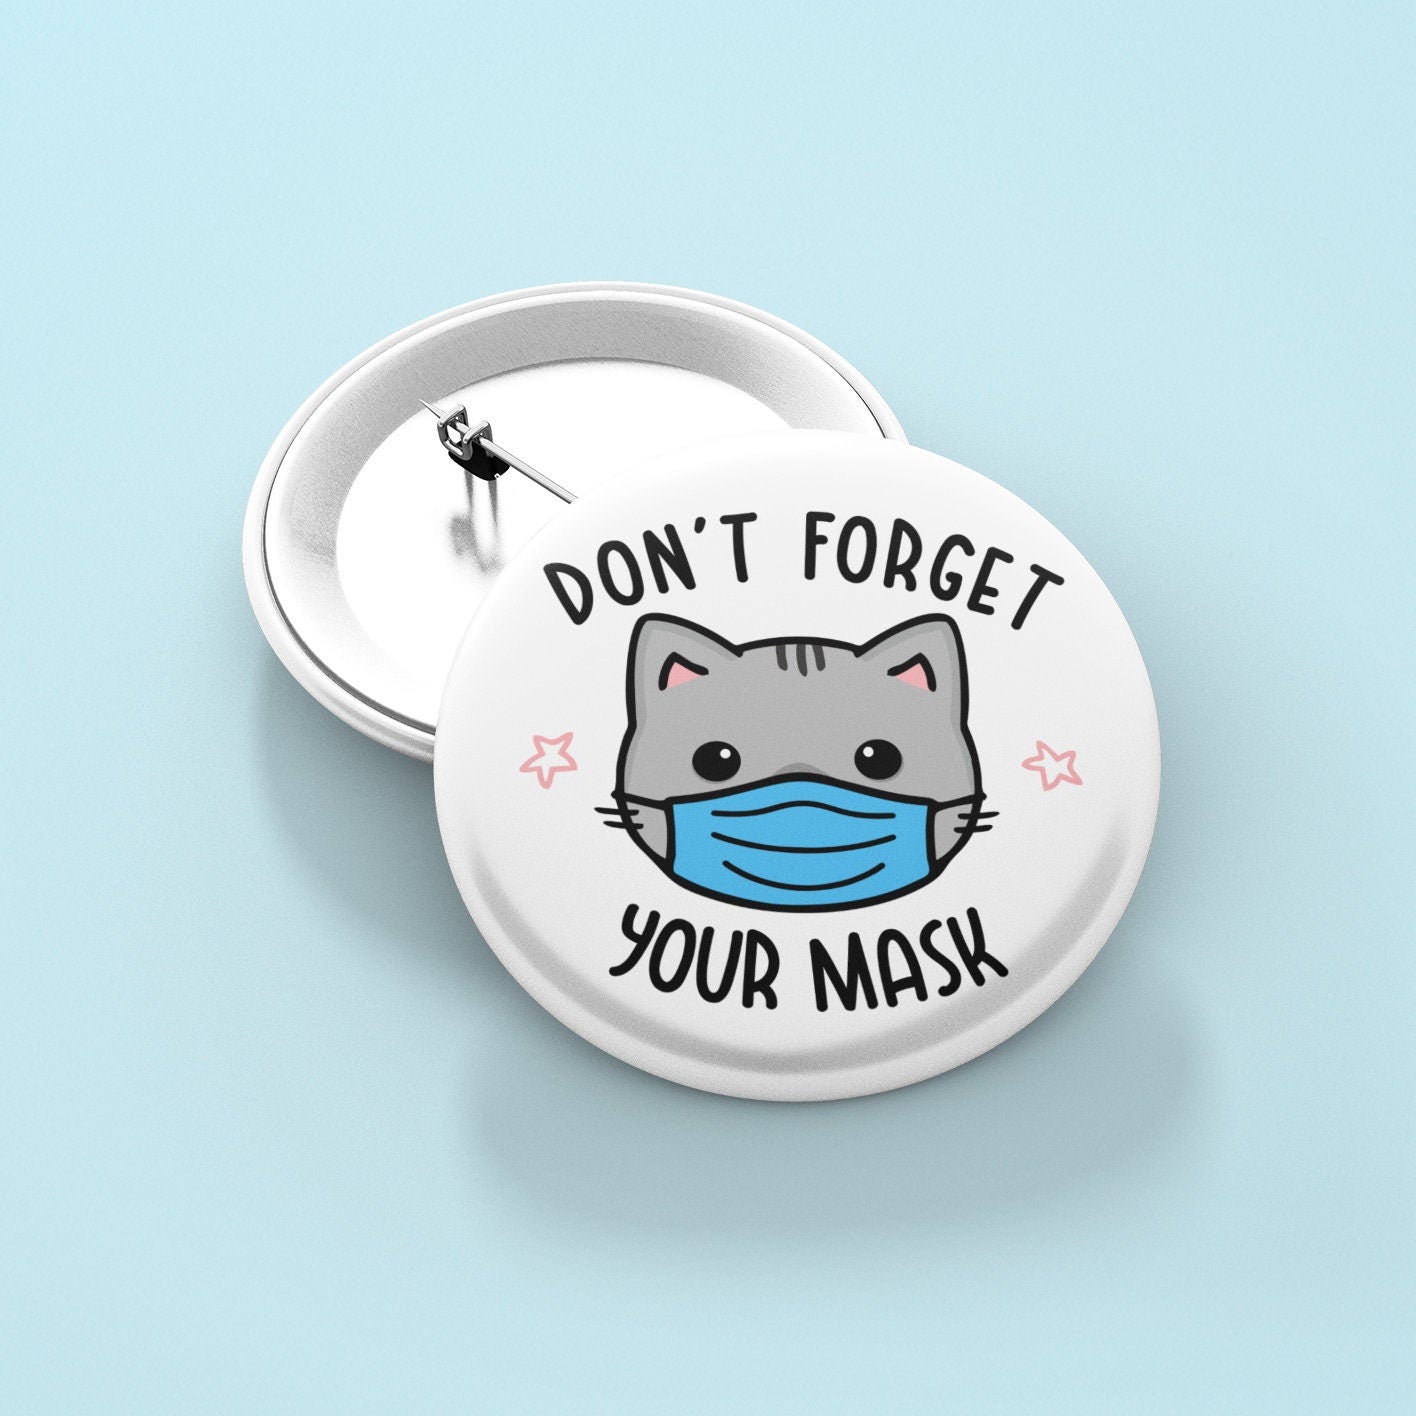 Don't Forget Your Mask Badge Pin | Wear A Mask, Face Covering, Facemask Badge, Social Distancing Gift